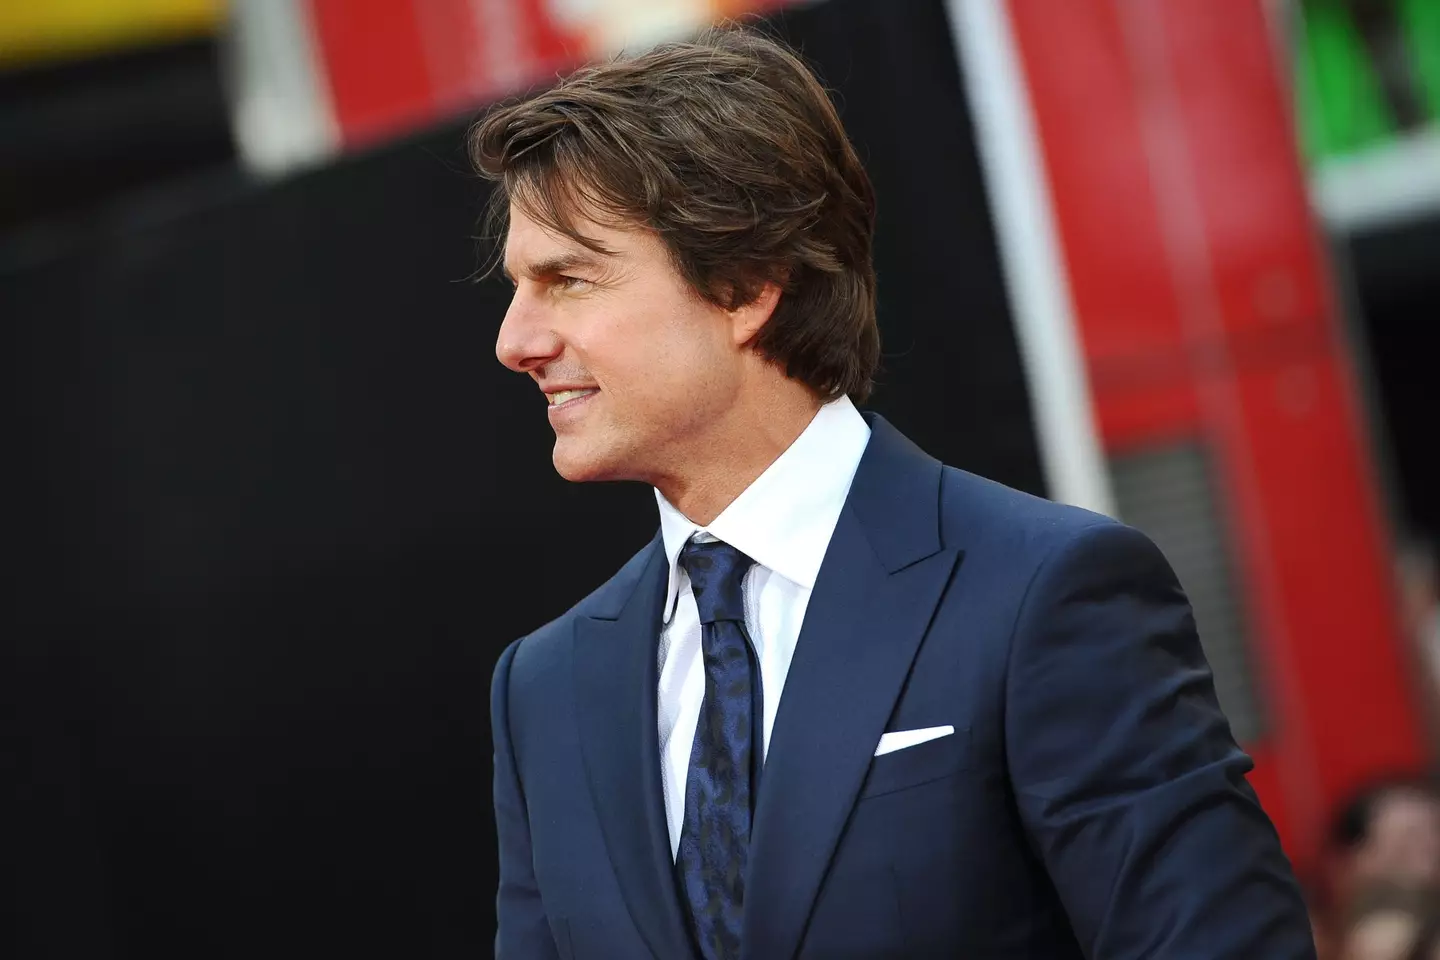 Tom Cruise is likely the most famous Scientologist in the world and a major representative of the church.